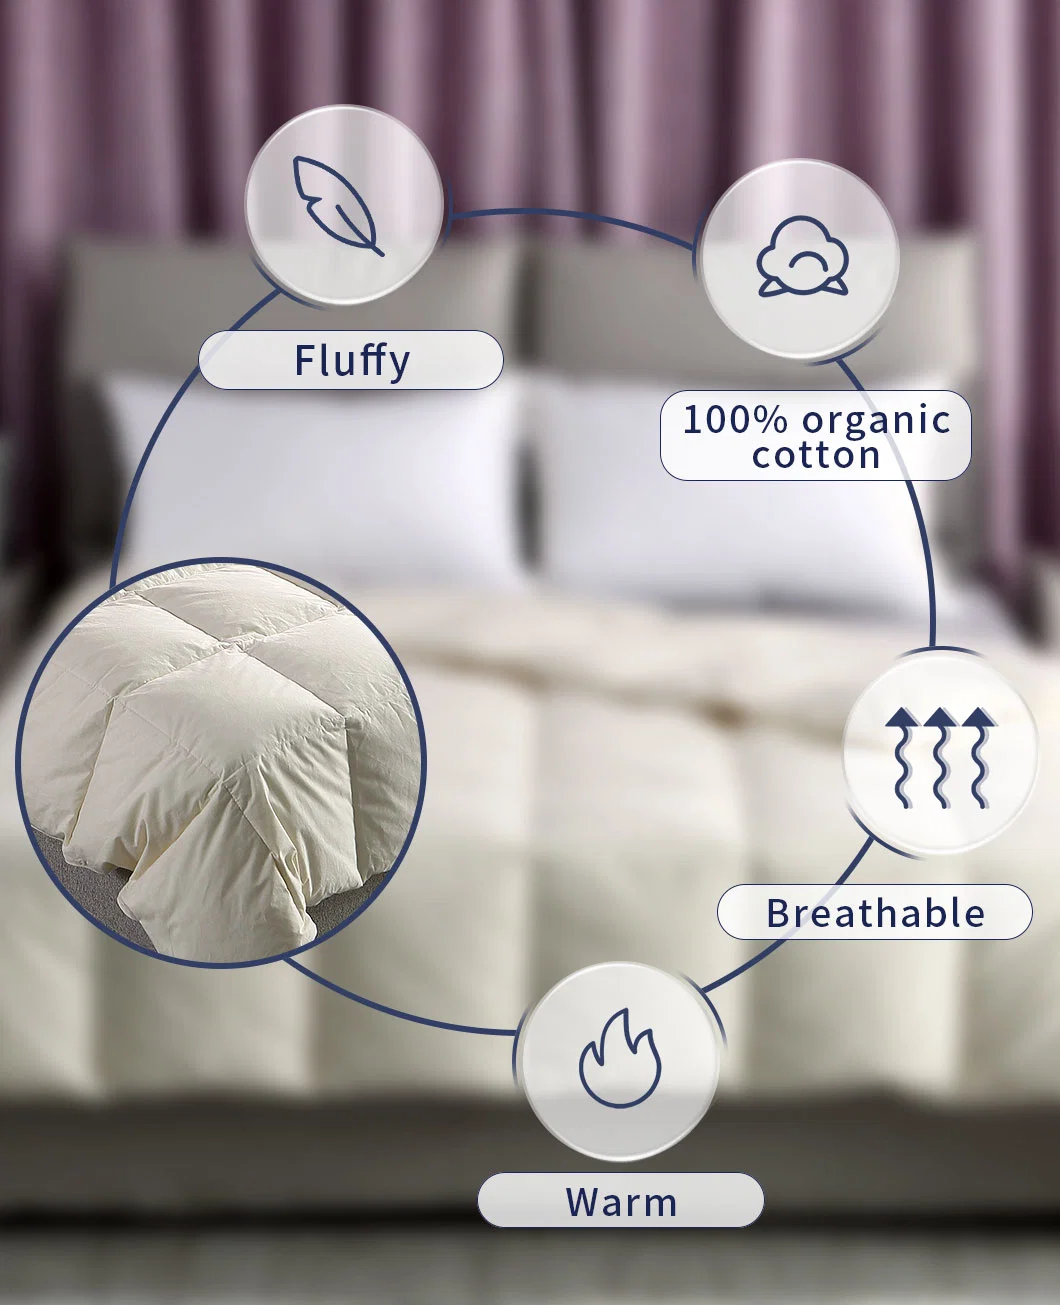 50% White Goose Down Filled Premium Quality Comforter with Organic Cotton Cover